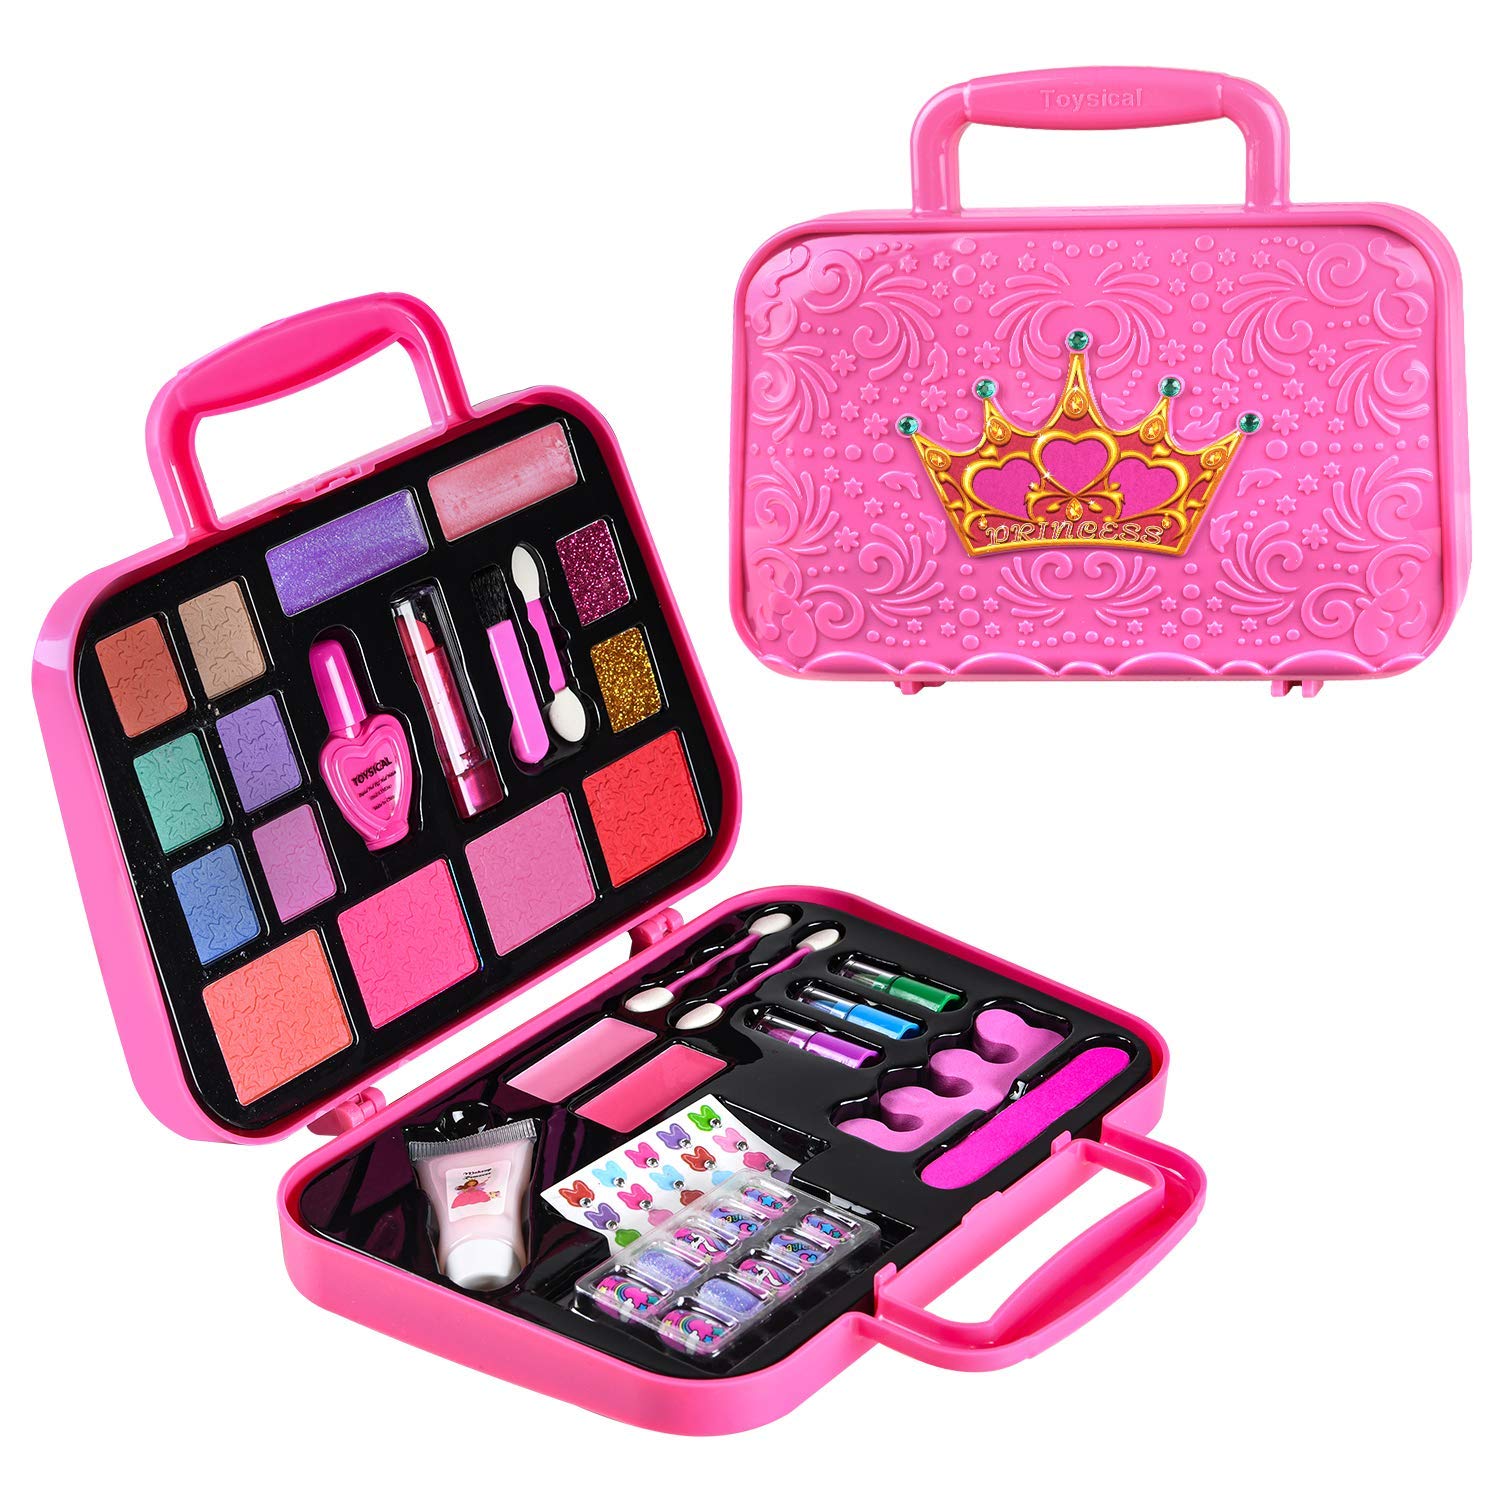 Toysical Kids Makeup Kit for Girl - with Make Up Remover - 30Pc Real Washable, Non Toxic Play Princess Cosmetic Set - Ideal Birthday for Little Girls Ages 3, 4, 5, 6 Year Old Child (Princess 2.0)